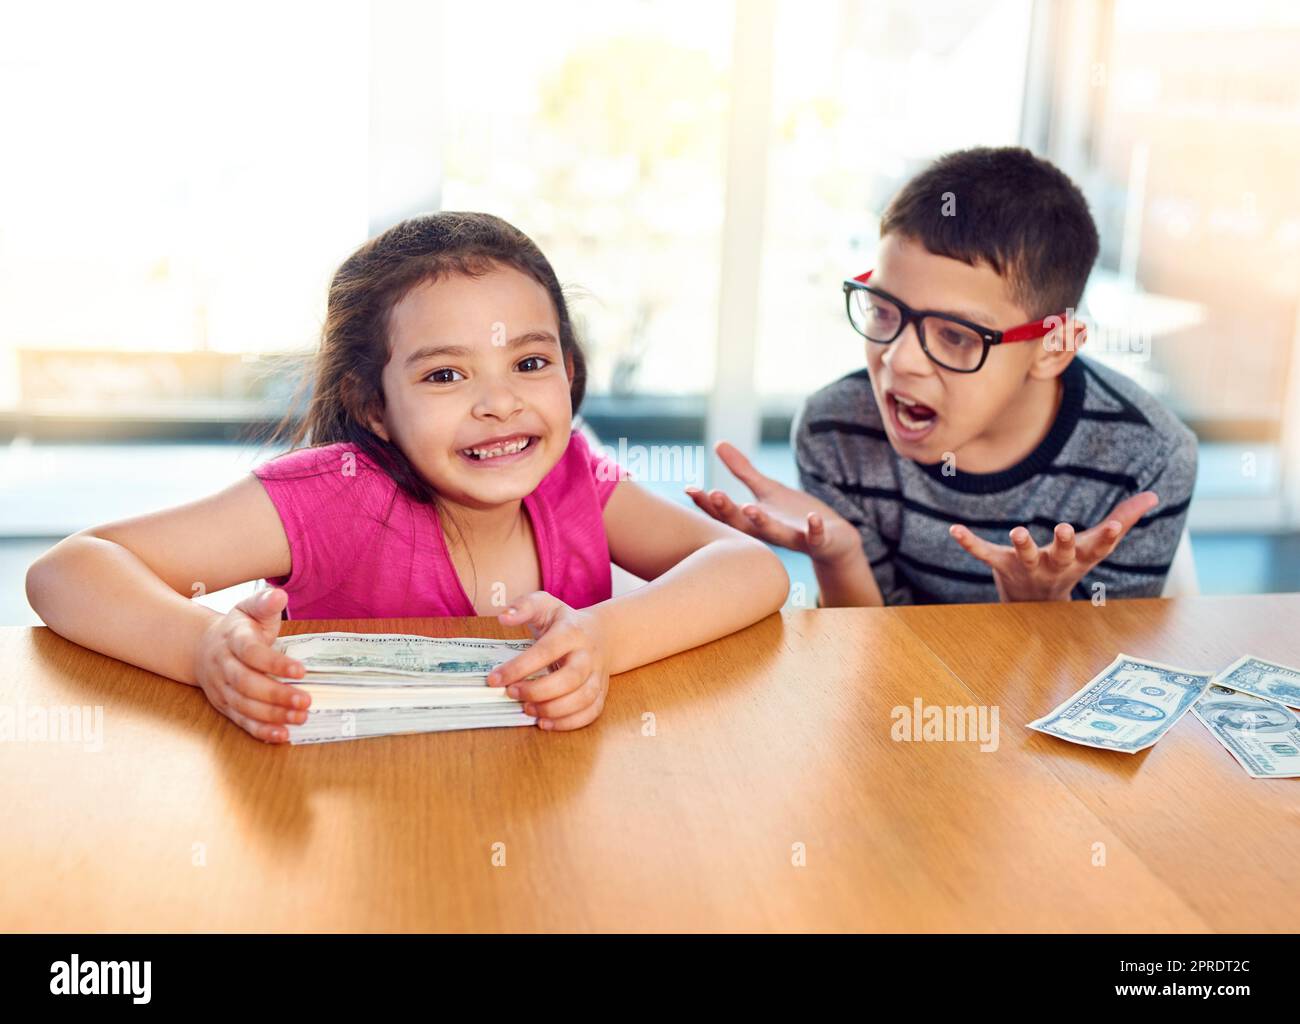 She always wins the bets between them. an adorable little girl holding a stack of money while her brother screams in disbelief at home. Stock Photo